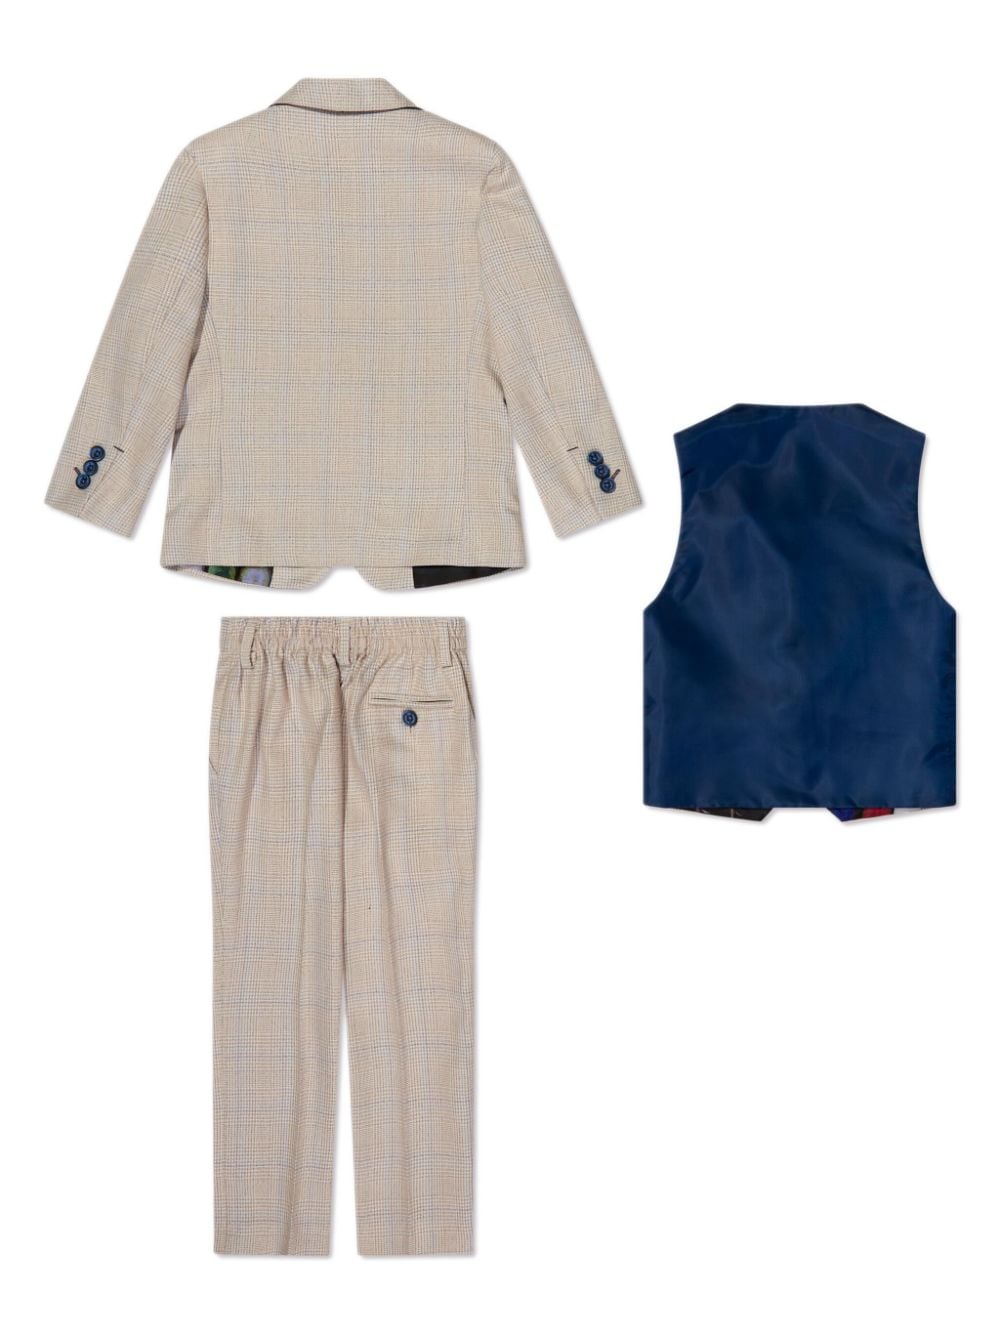 HOUSE OF CAVANI KIDS single-breasted checked three-piece suit - Beige